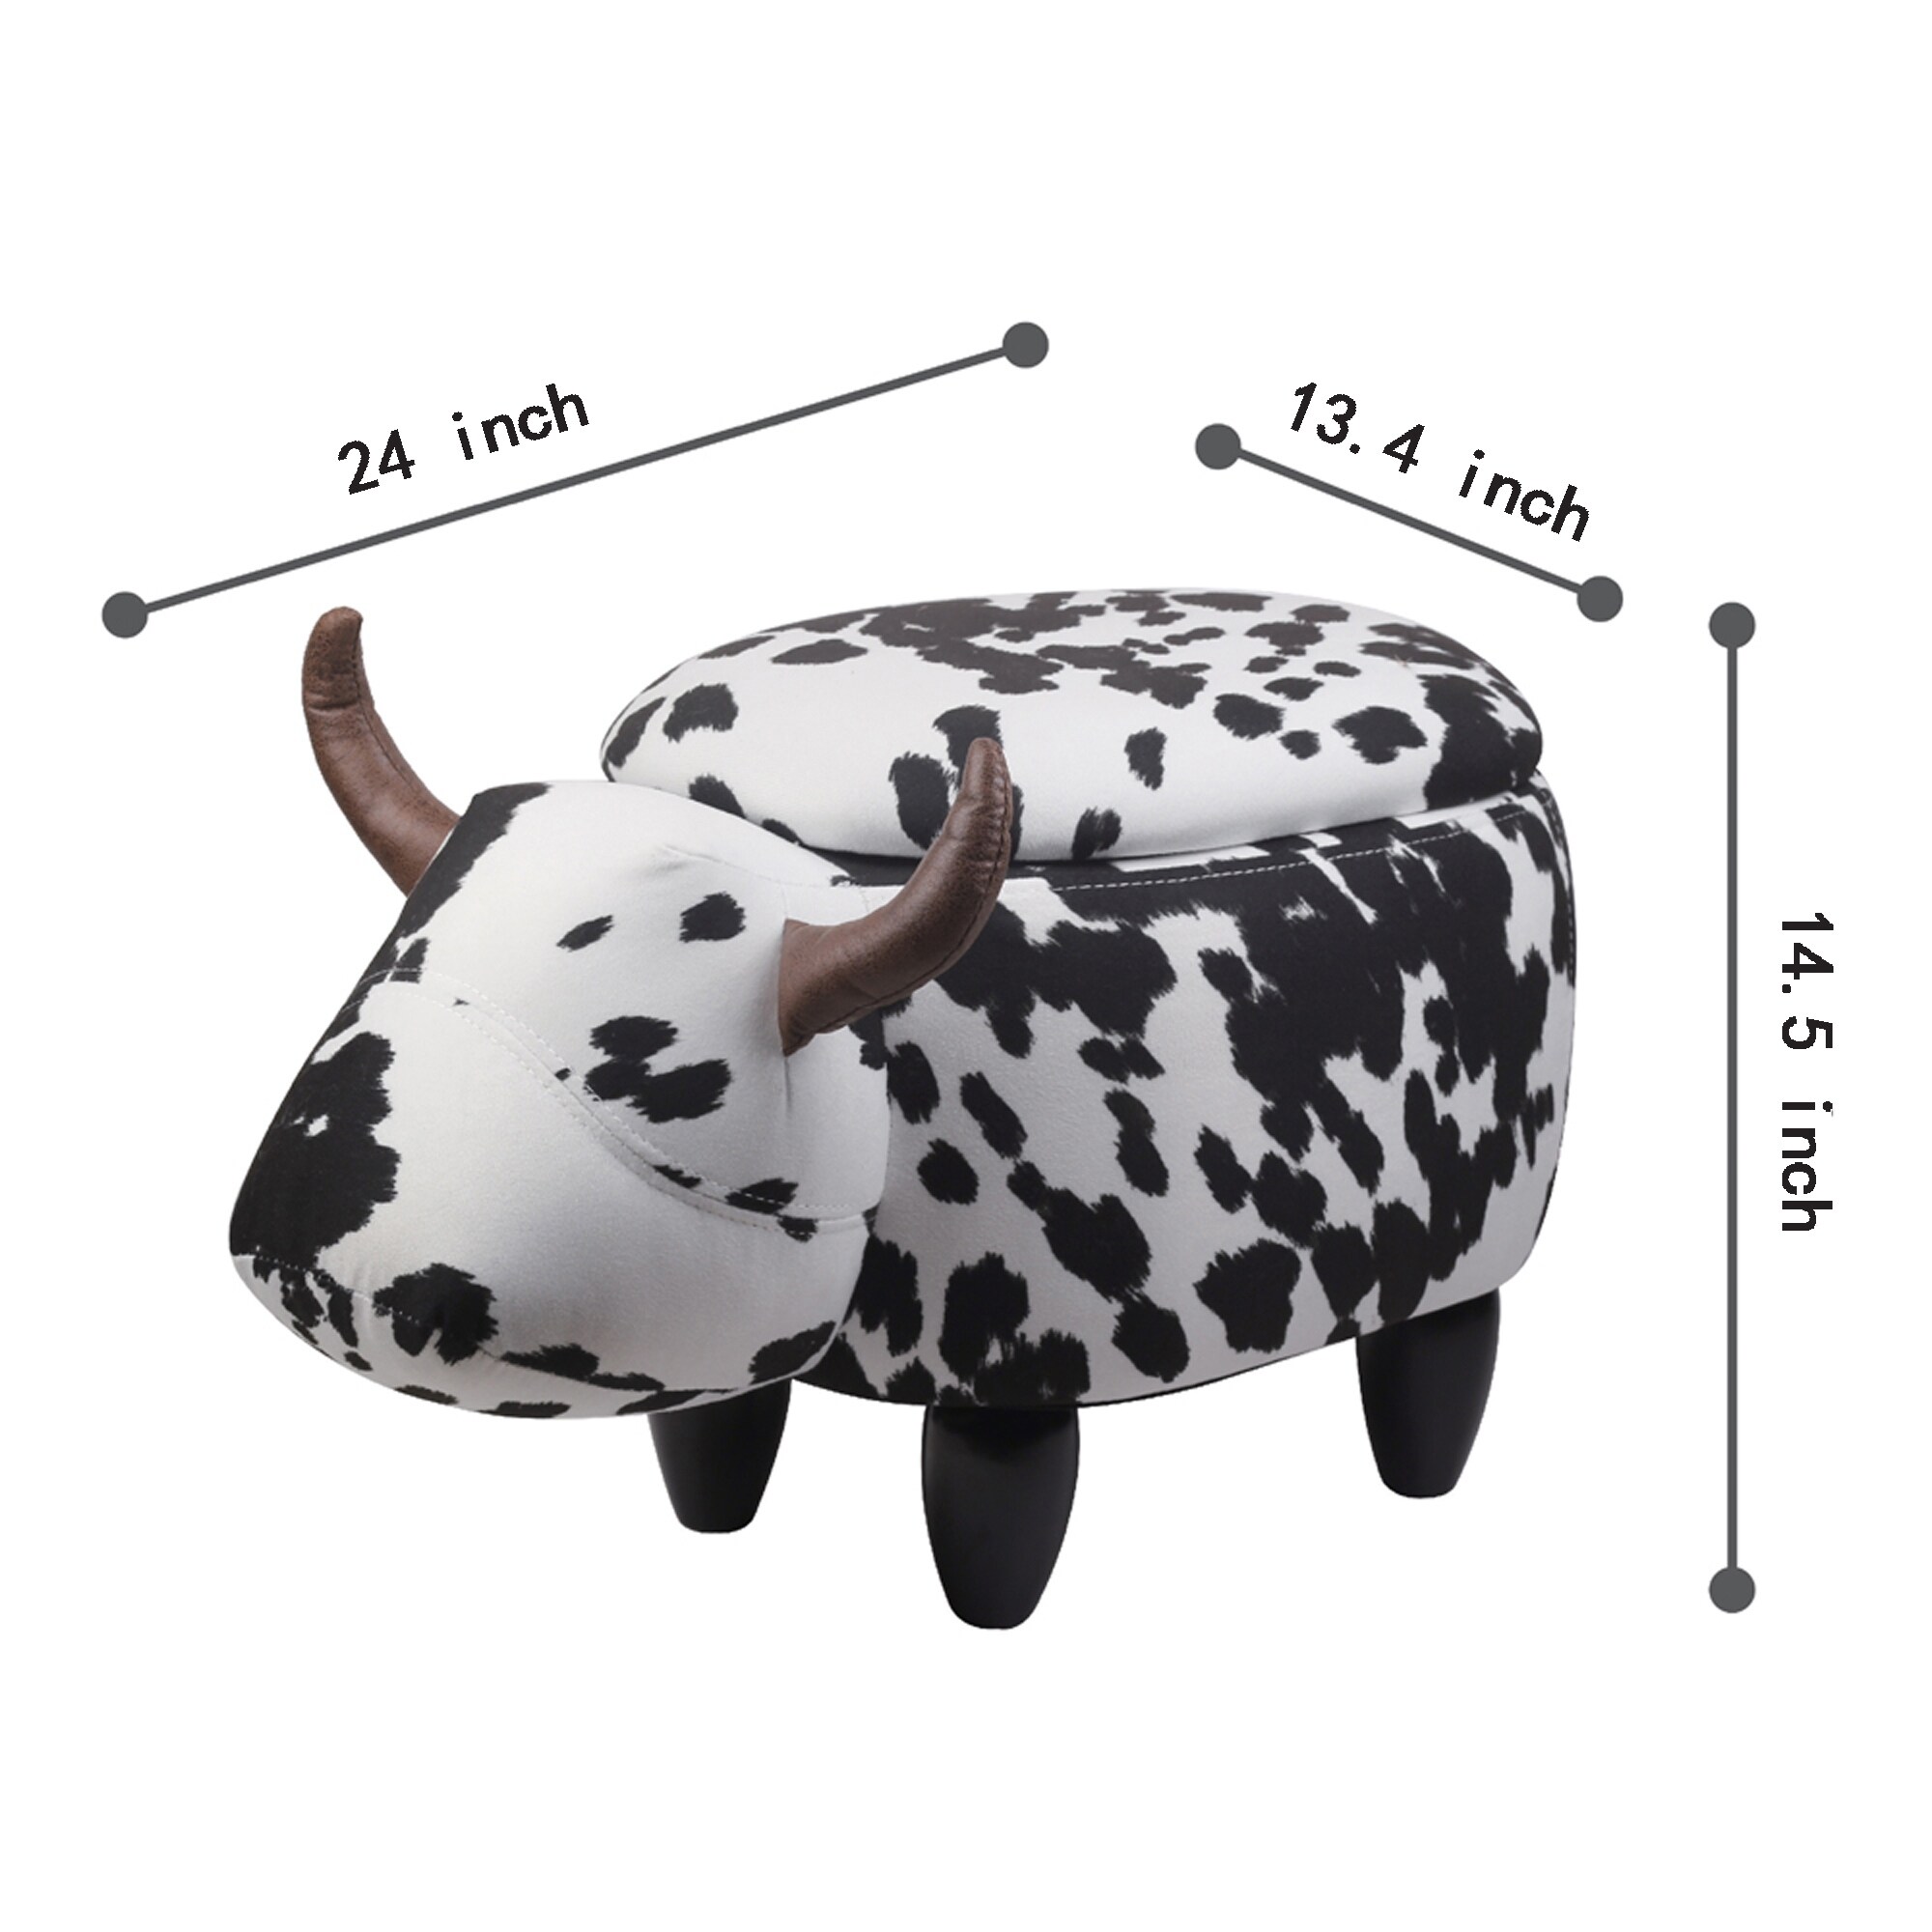 COW Footstools Ottomans Padded Cushion Pouffe Stool Rest Children Toy Gift 